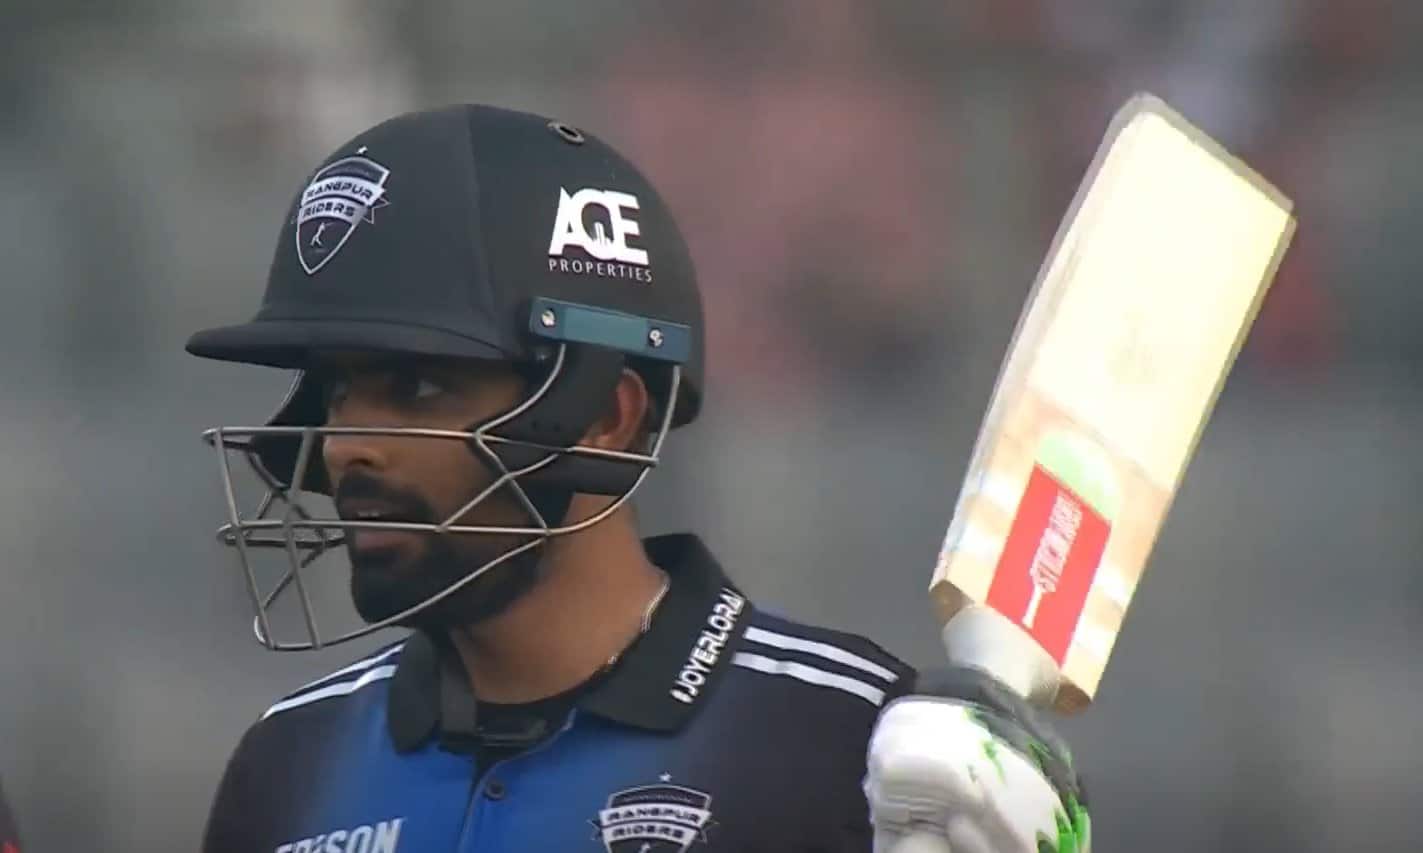 [Watch] Babar Azam Guides Rangpur To A Clinical Victory With Fighting Fifty On BPL Return